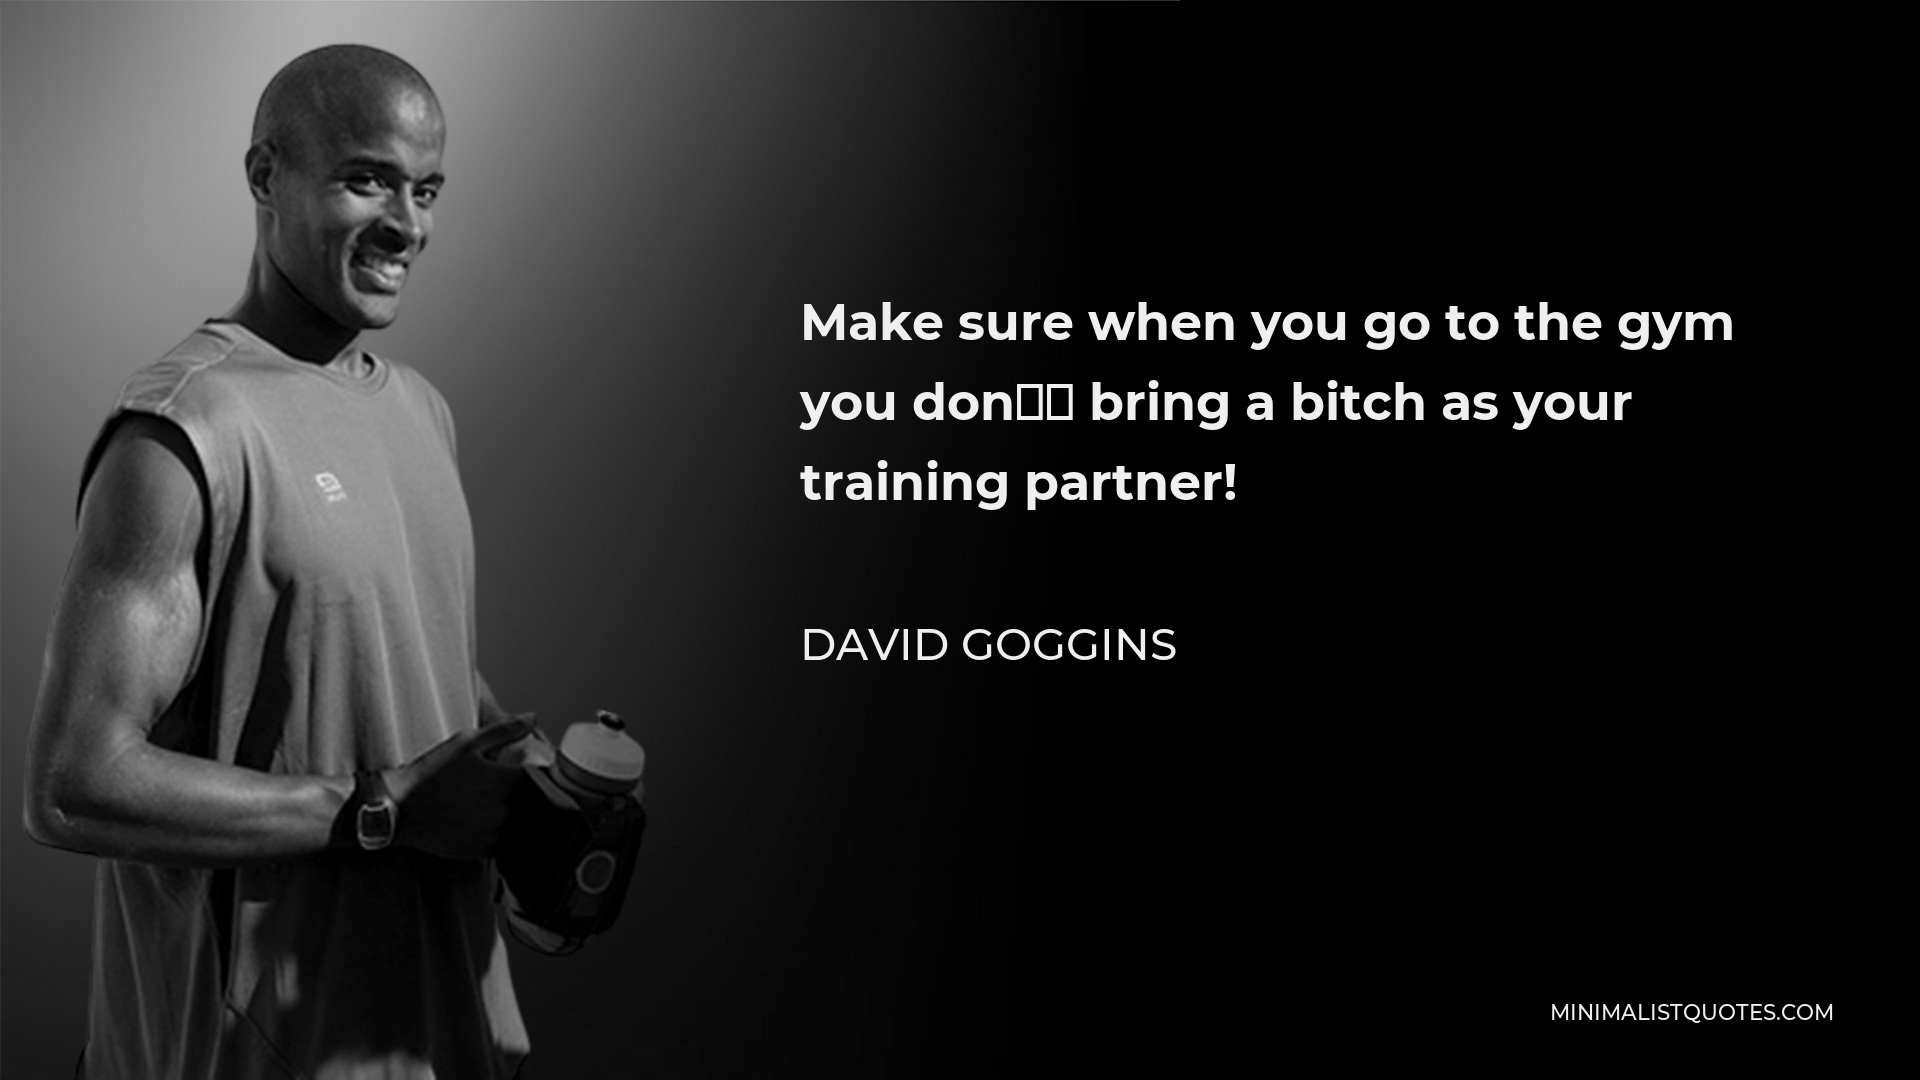 David Goggins Quote - Make sure when you go to the gym you don’t bring a bitch as your training partner!